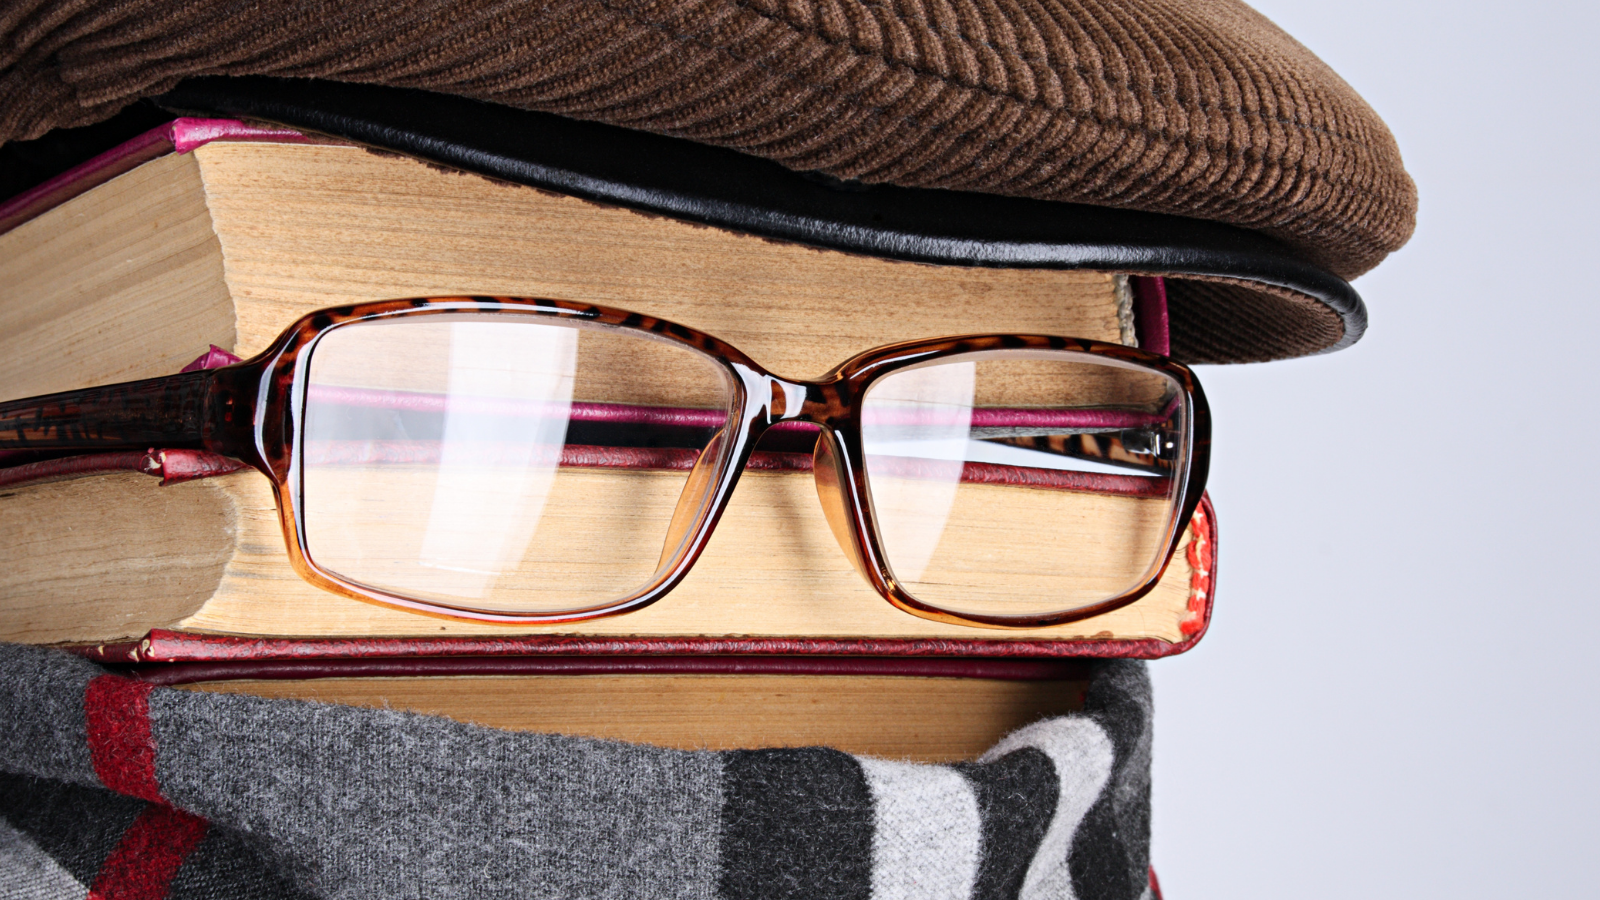 Book wearing glasses